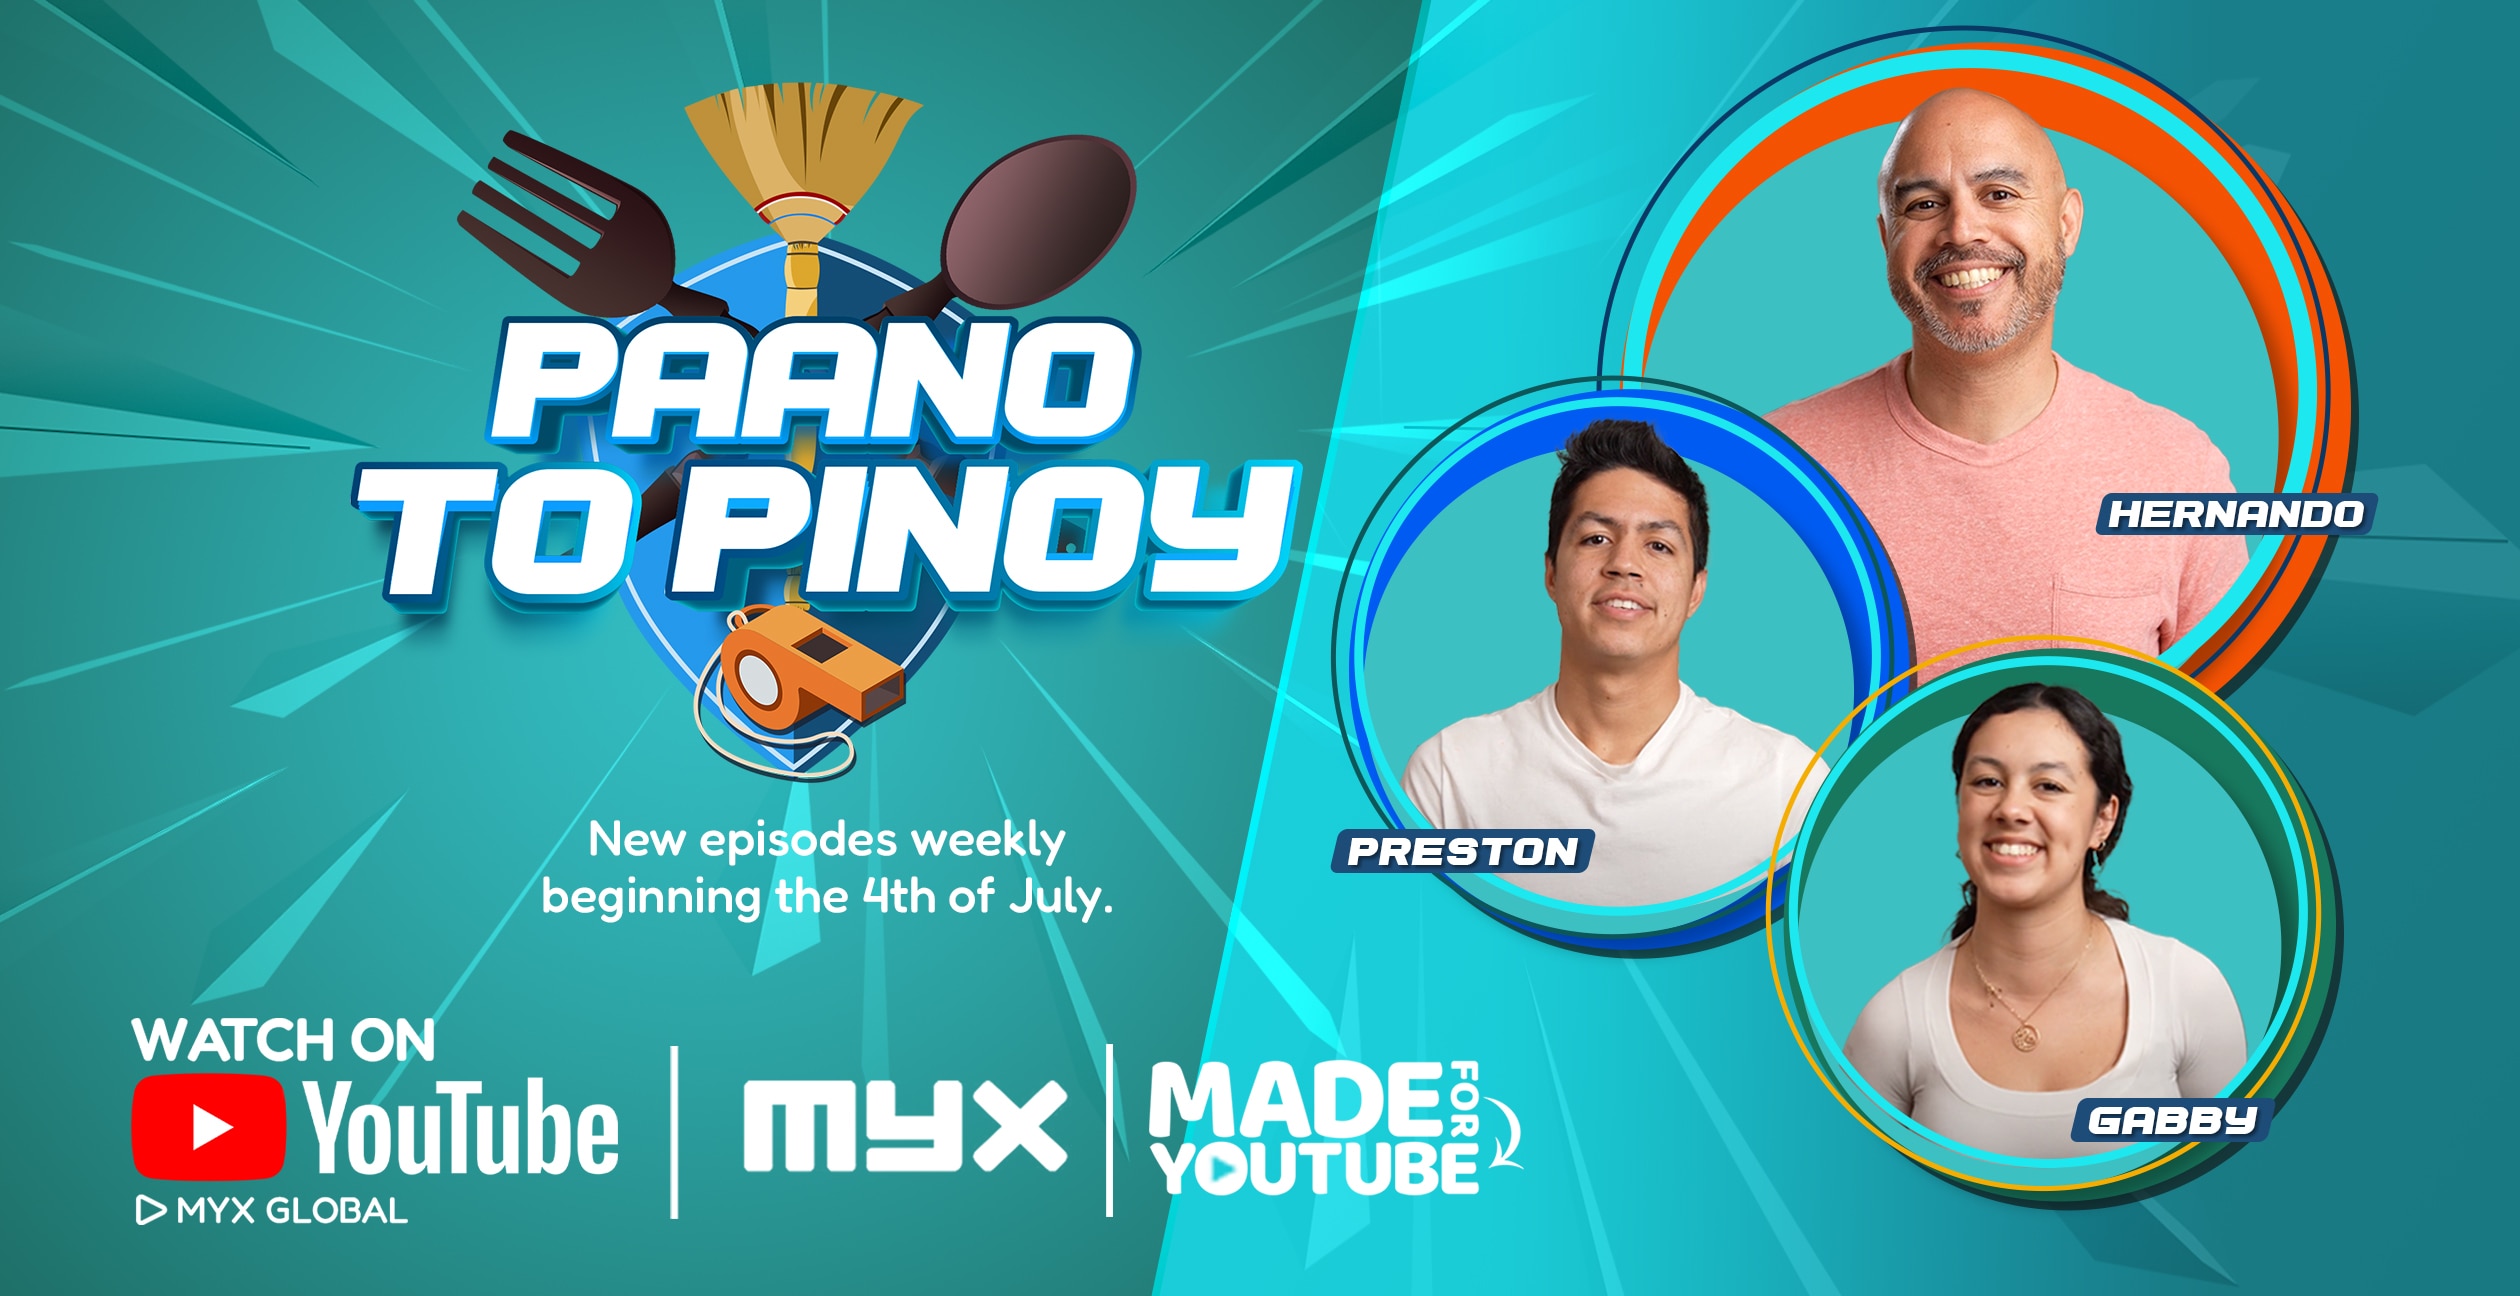 Introducing "Paano to Pinoy,” a Hilarious and Educational YouTube Series Showcasing the Filipino Culture